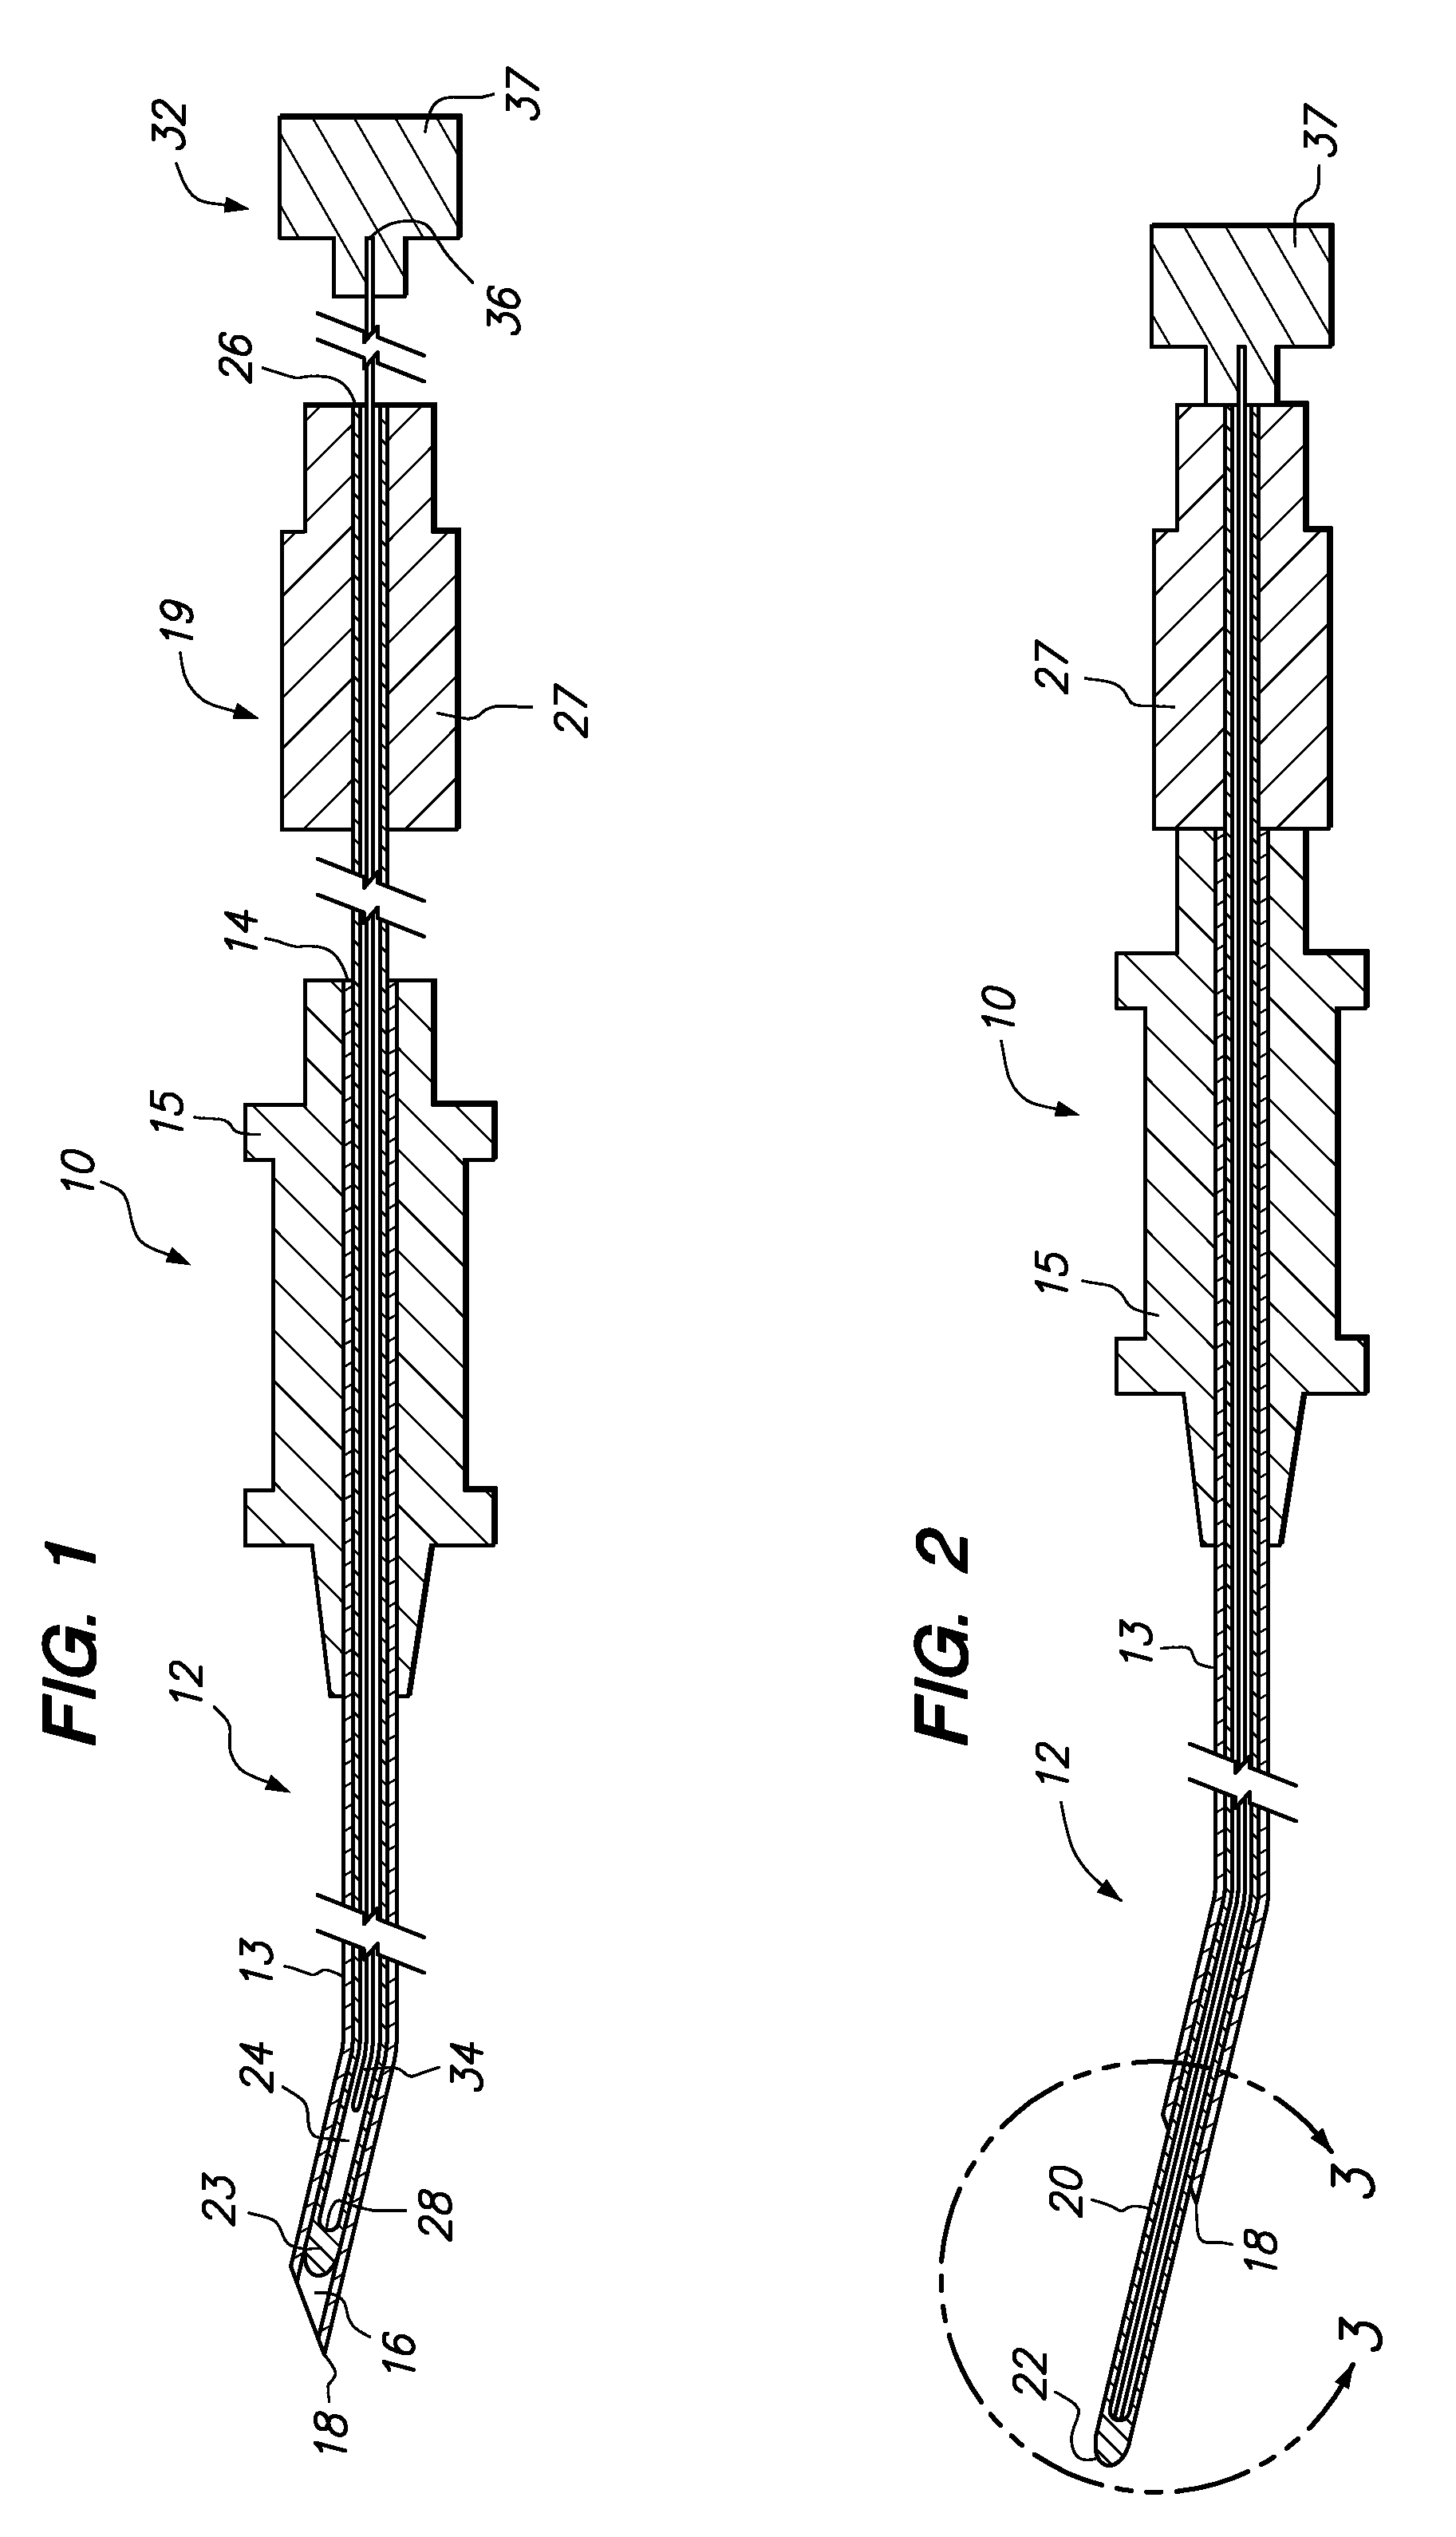 Epidural radiofrequency catheter for effectuating RF treatment in spinal canal and method of using same